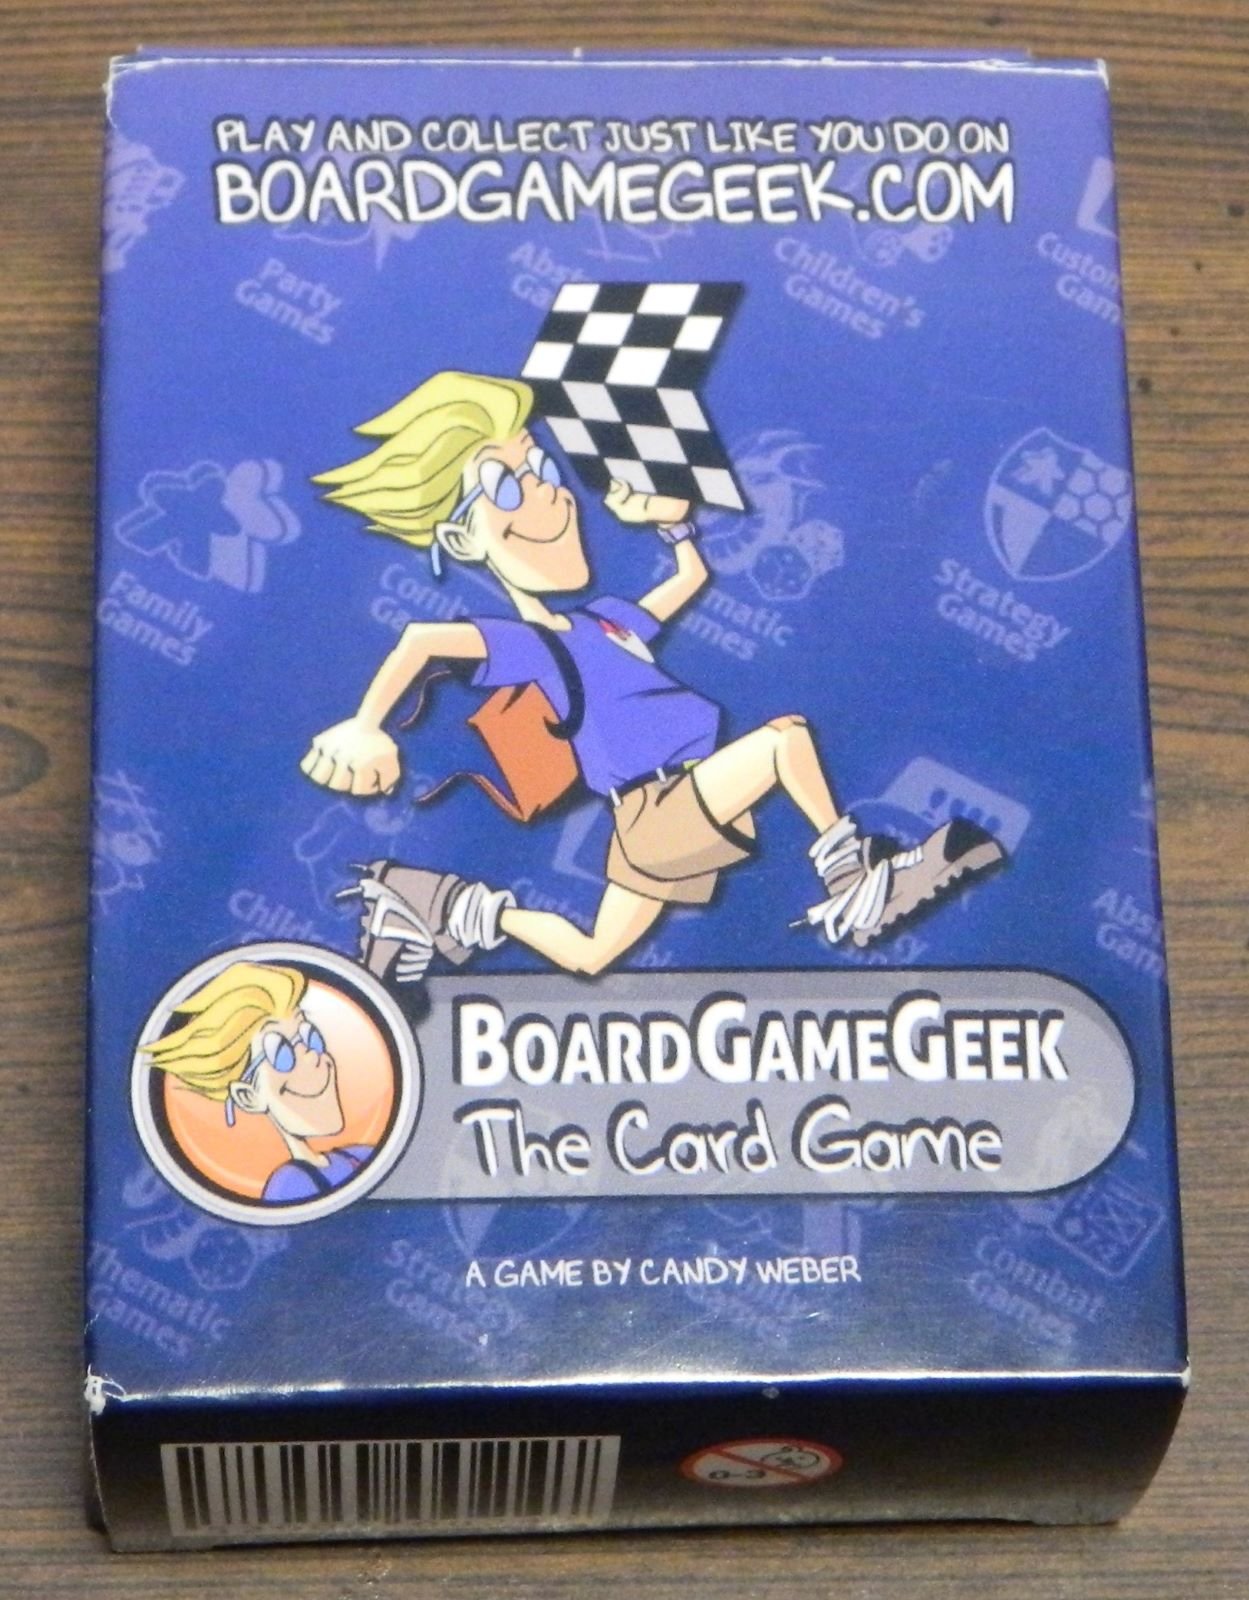 Box for BoardGameGeek The Card Game